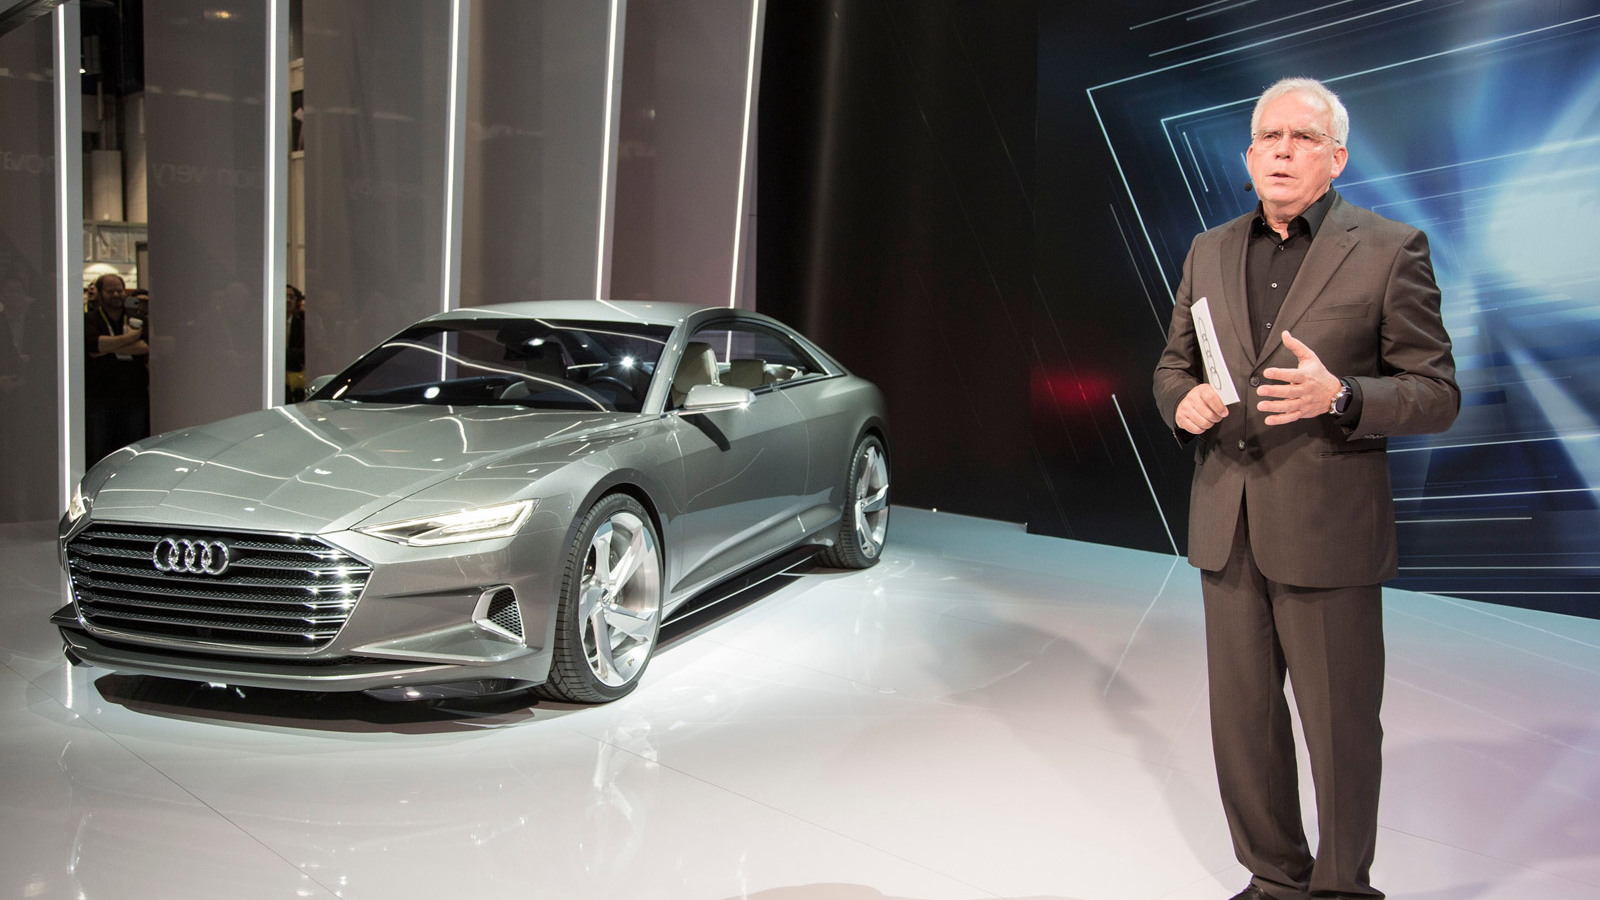 Audi Prologue Piloted Driving concept, 2015 Consumer Electronics Show